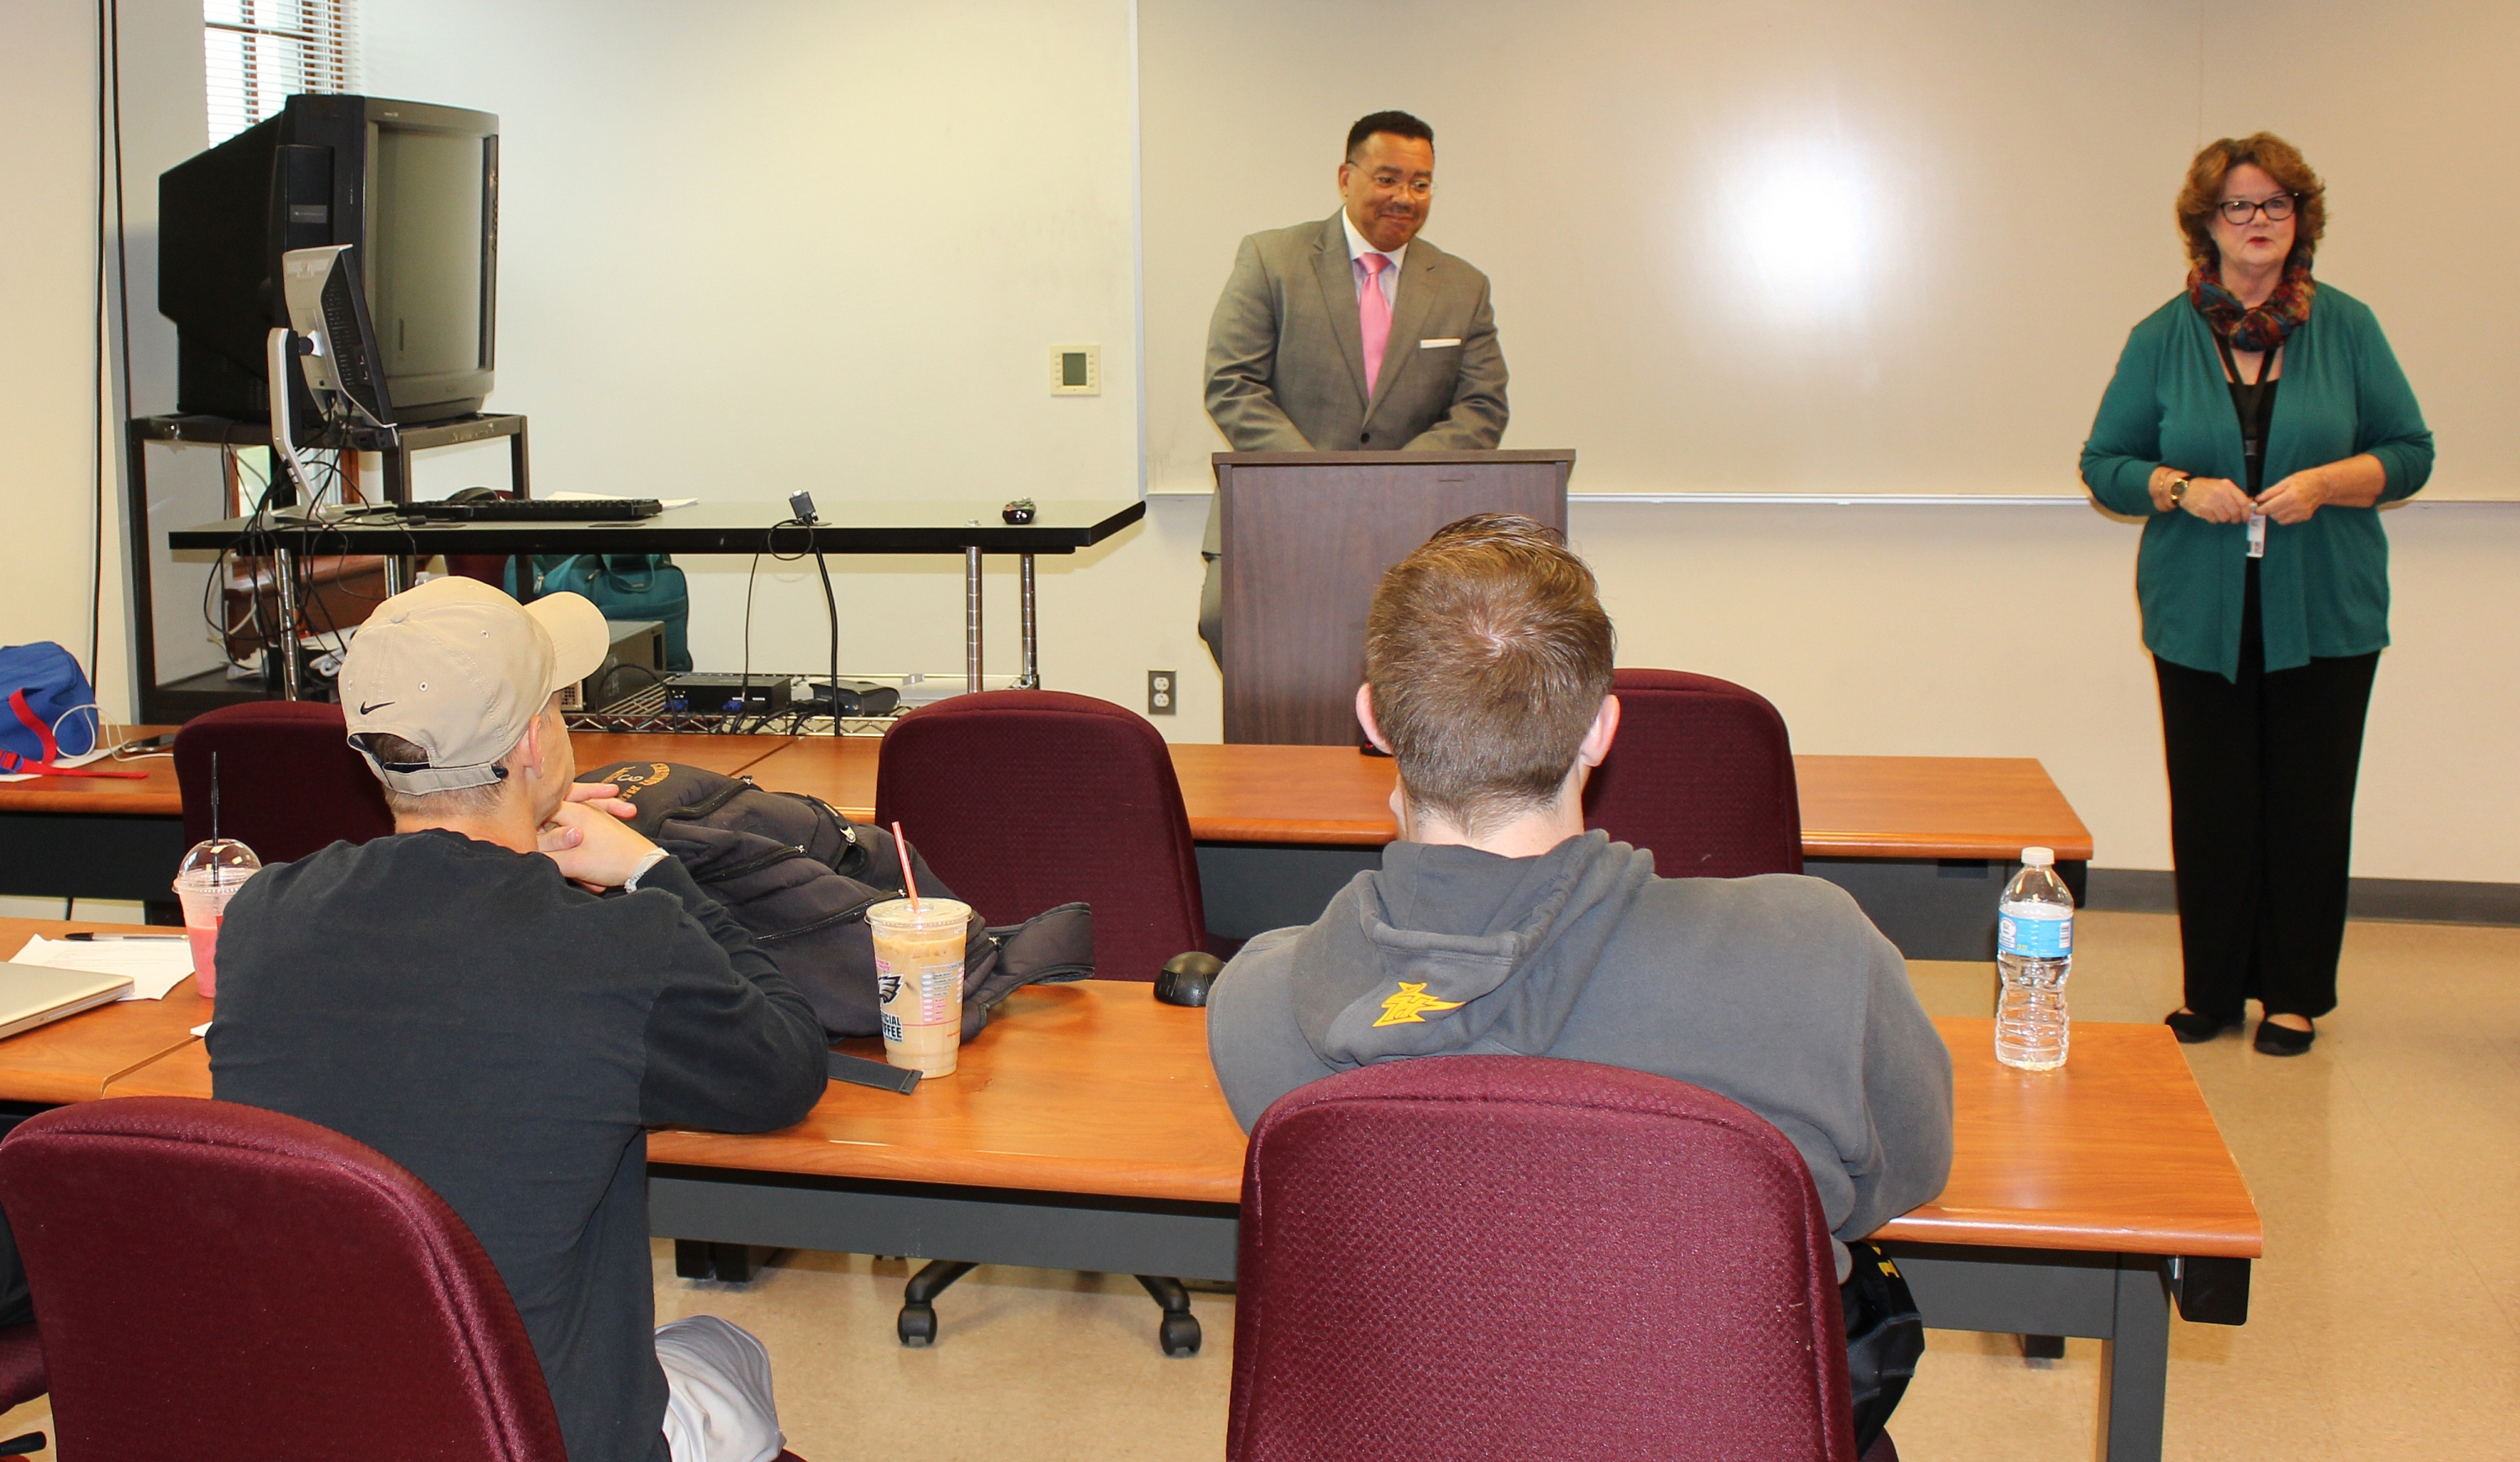 Sara Kitchen, J.D., welcomed Kevin Bethel '08 SCPS before he addressed her criminal justice class. Photo credit: Marilee Gallagher '14 